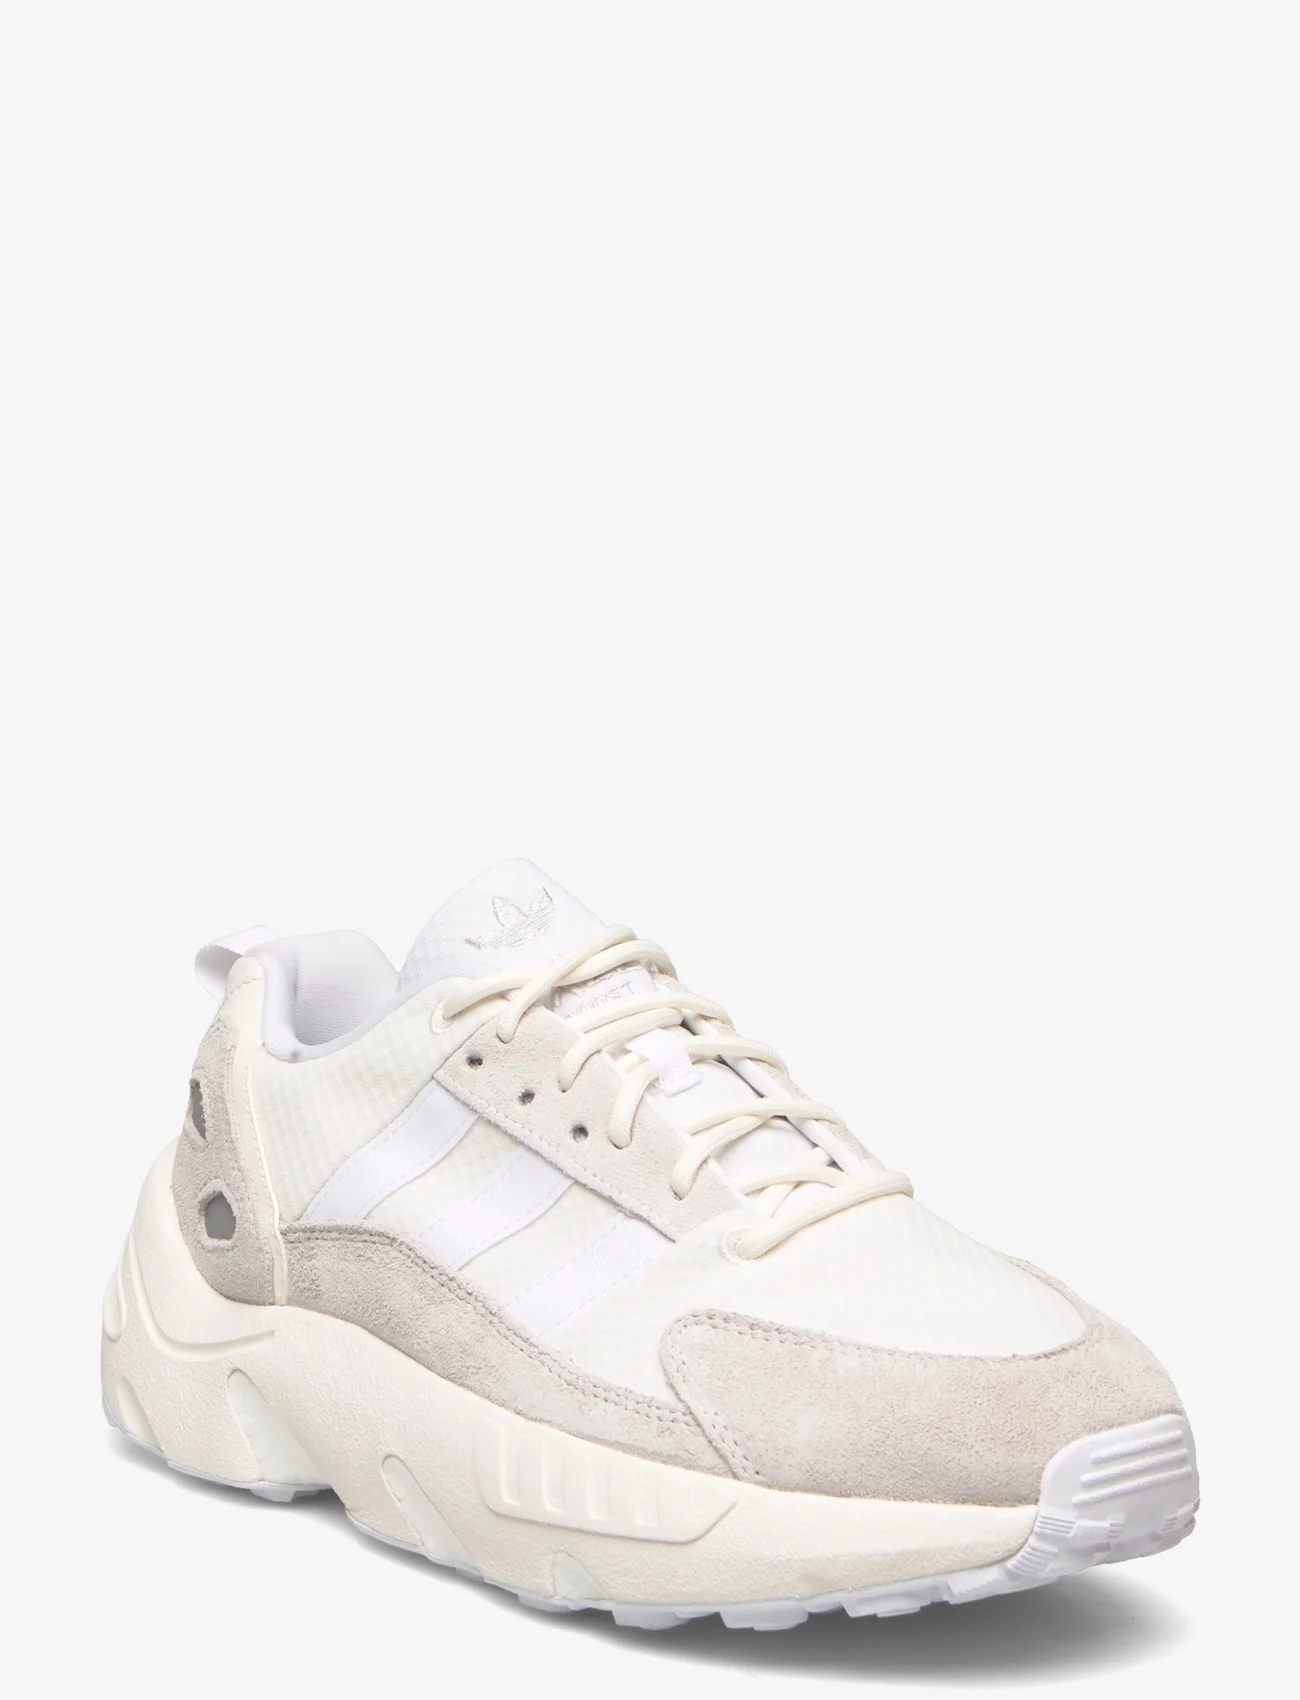 adidas Originals - ZX 22 BOOST Shoes - chunky sneaker - ftwwht/ftwwht/clowhi - 0